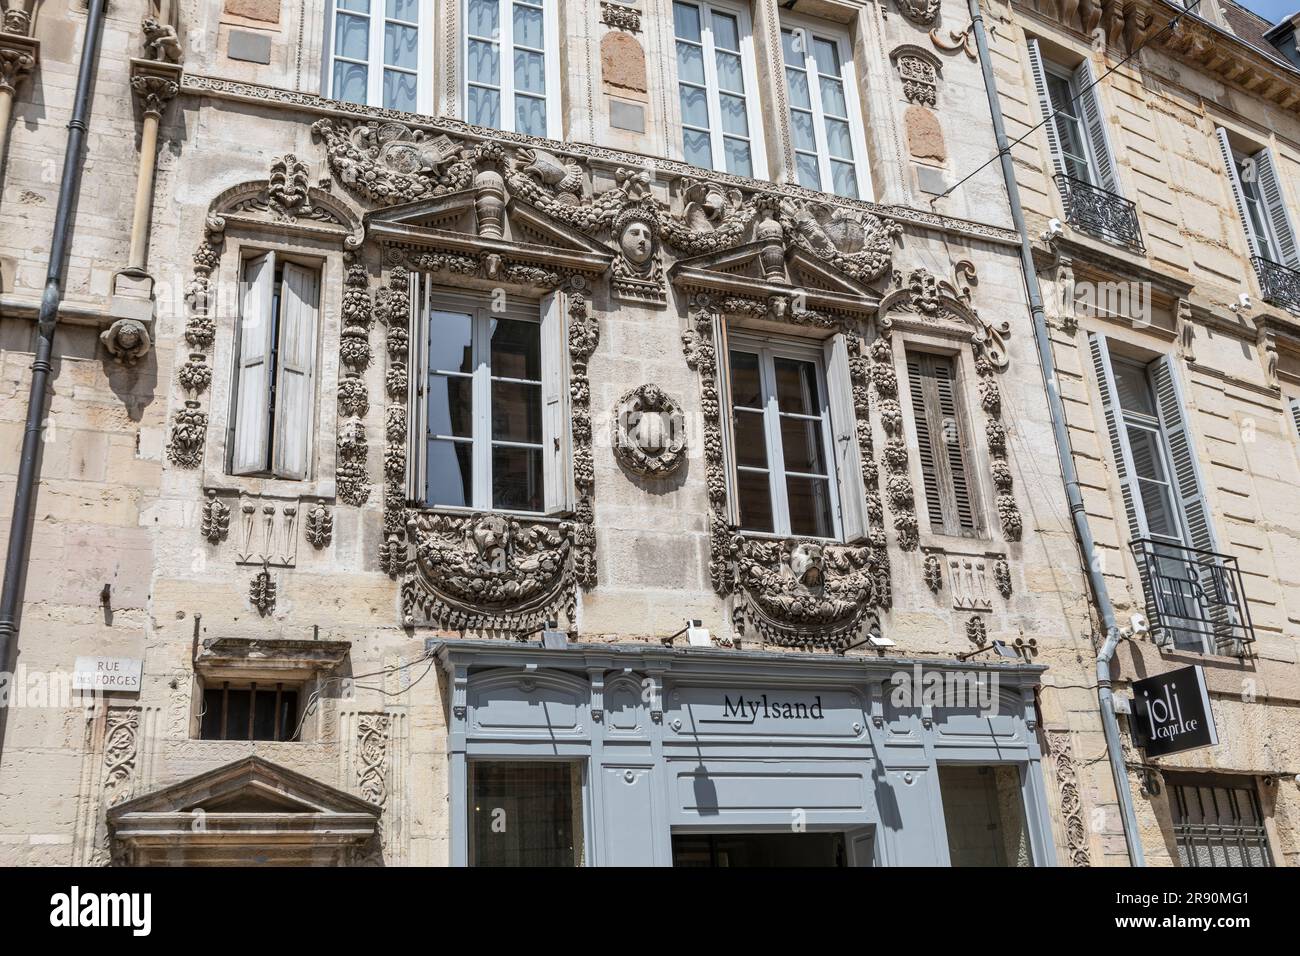 A decorative building on Rue Des Forges in Dijon, France Stock Photo